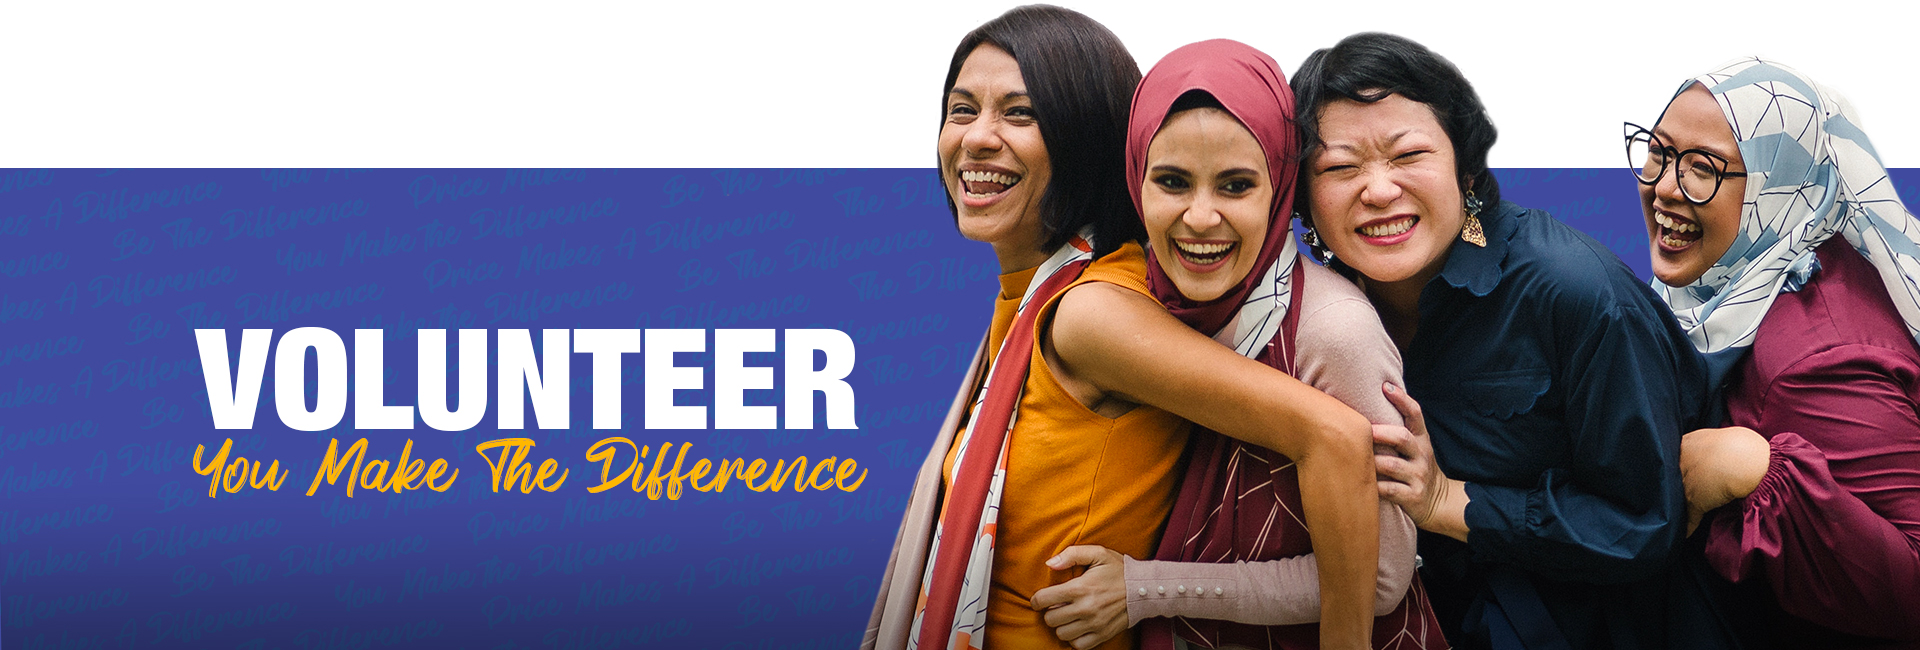 Image with 4 ladies hugging and smiling. Blue background that reads repetitive text that reads "You make the difference", "Price makes s difference", "Be the difference". Text that reads "Volunteer" "You Make the Difference".